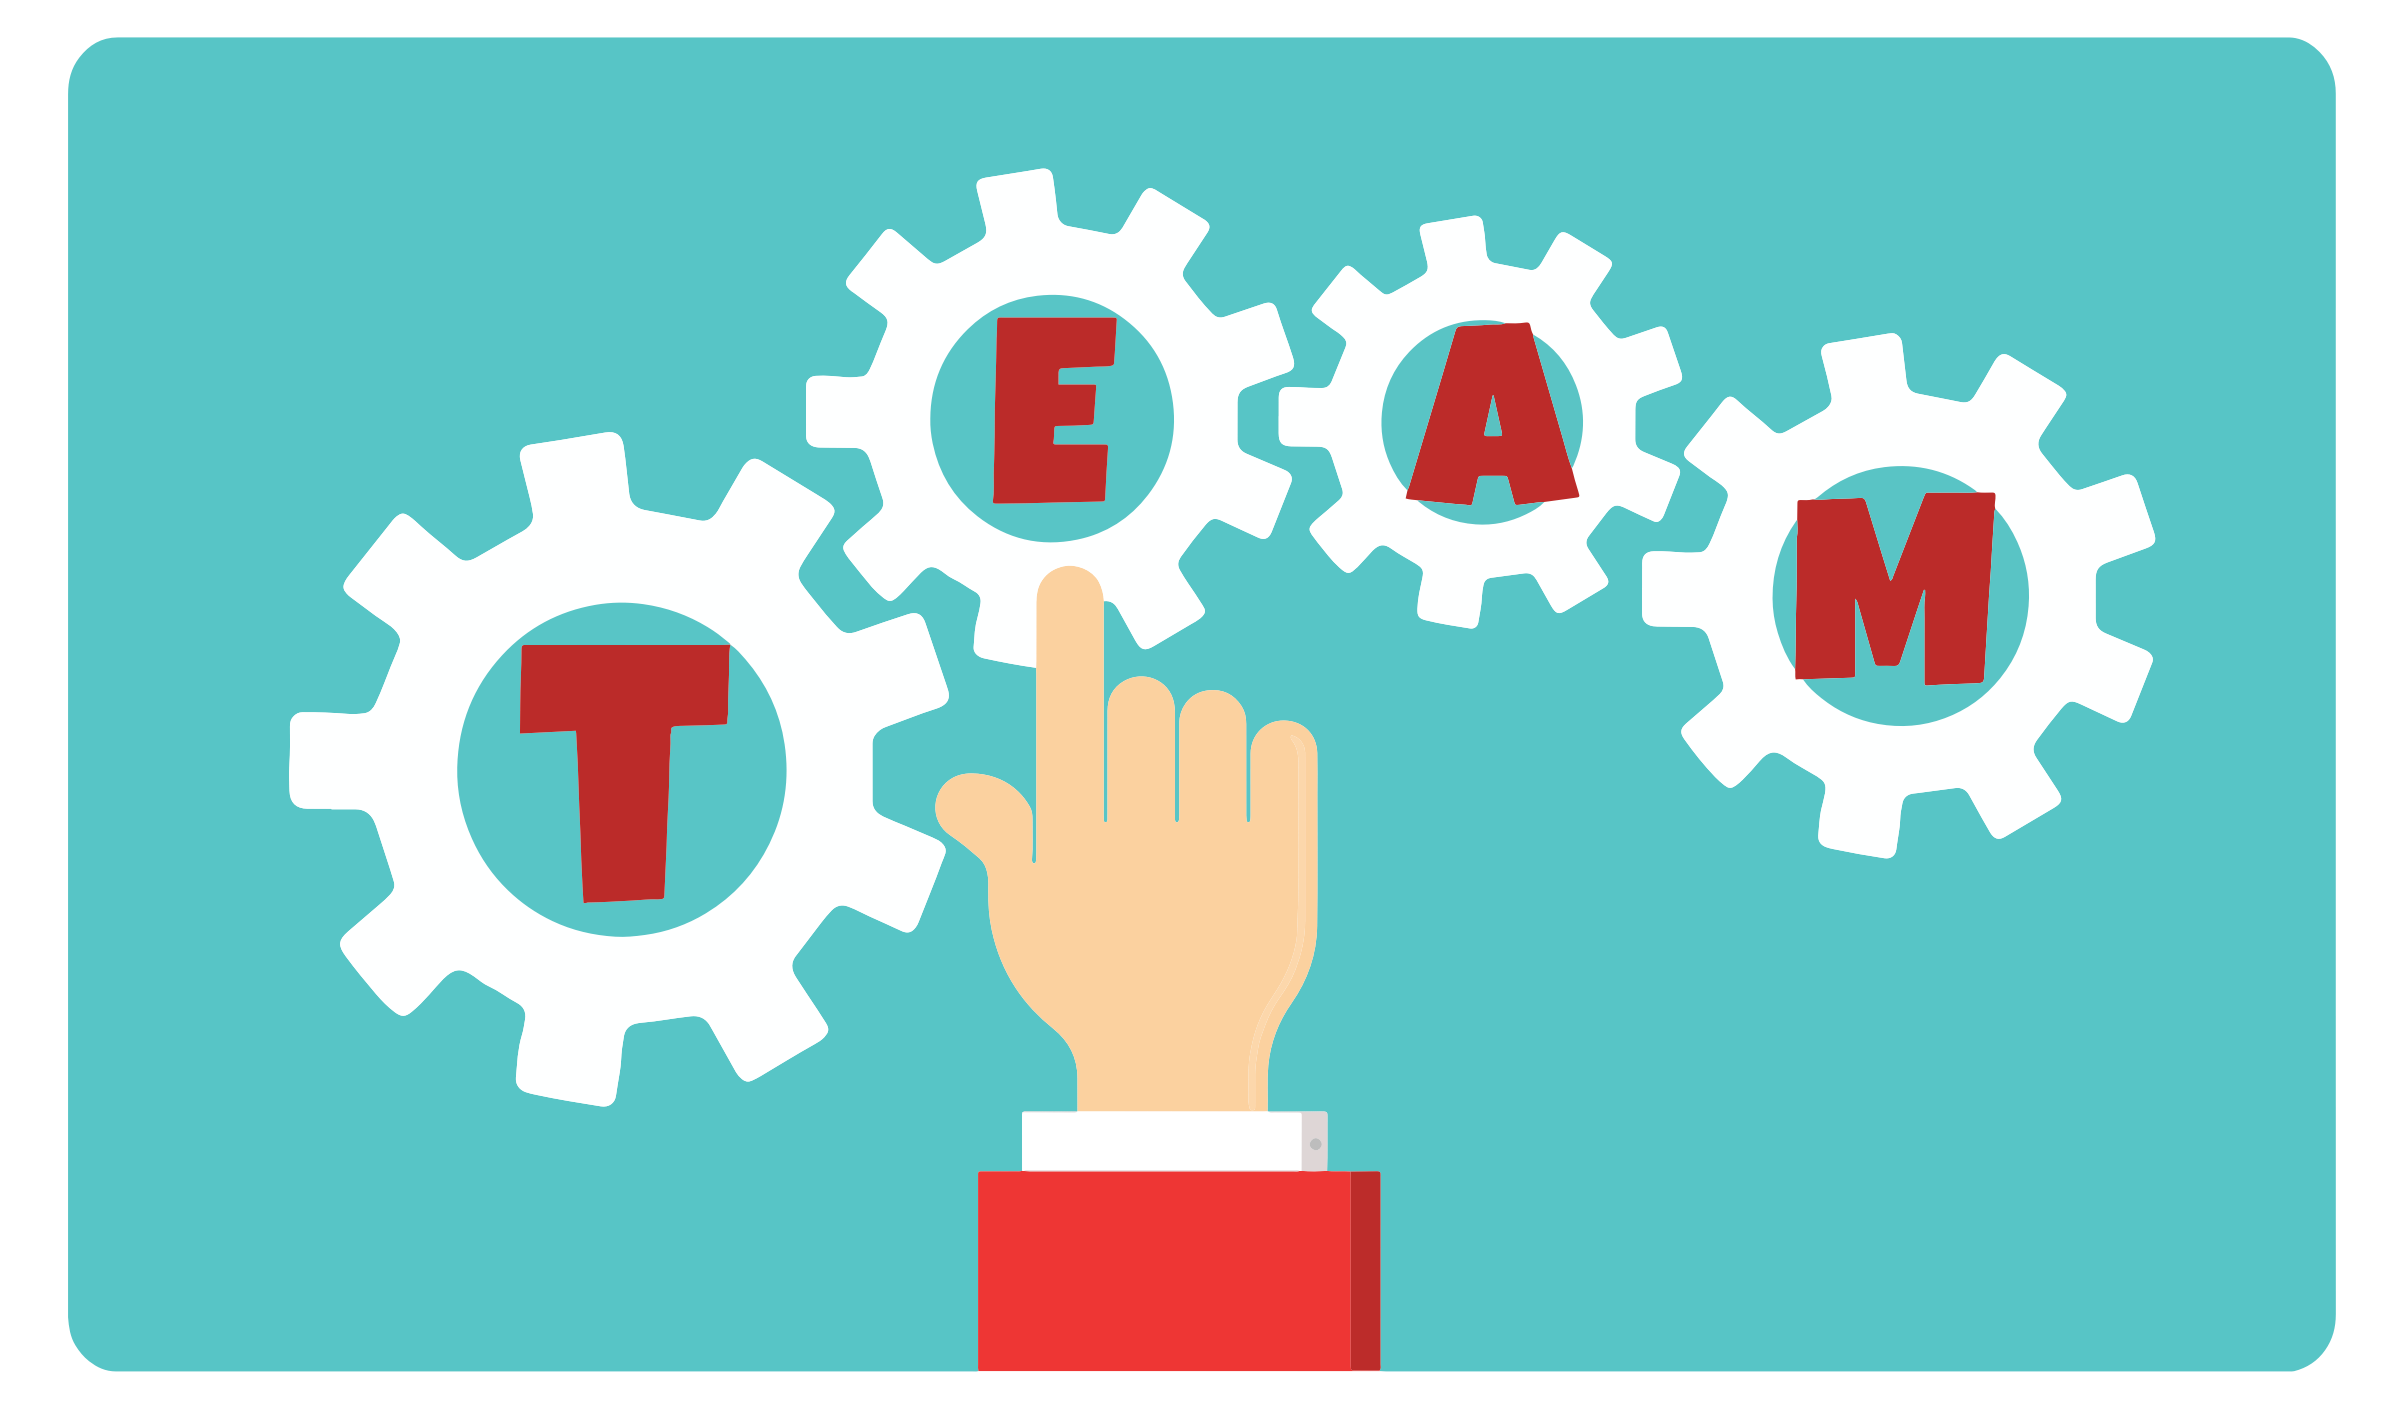 free clipart images for teamwork - photo #29